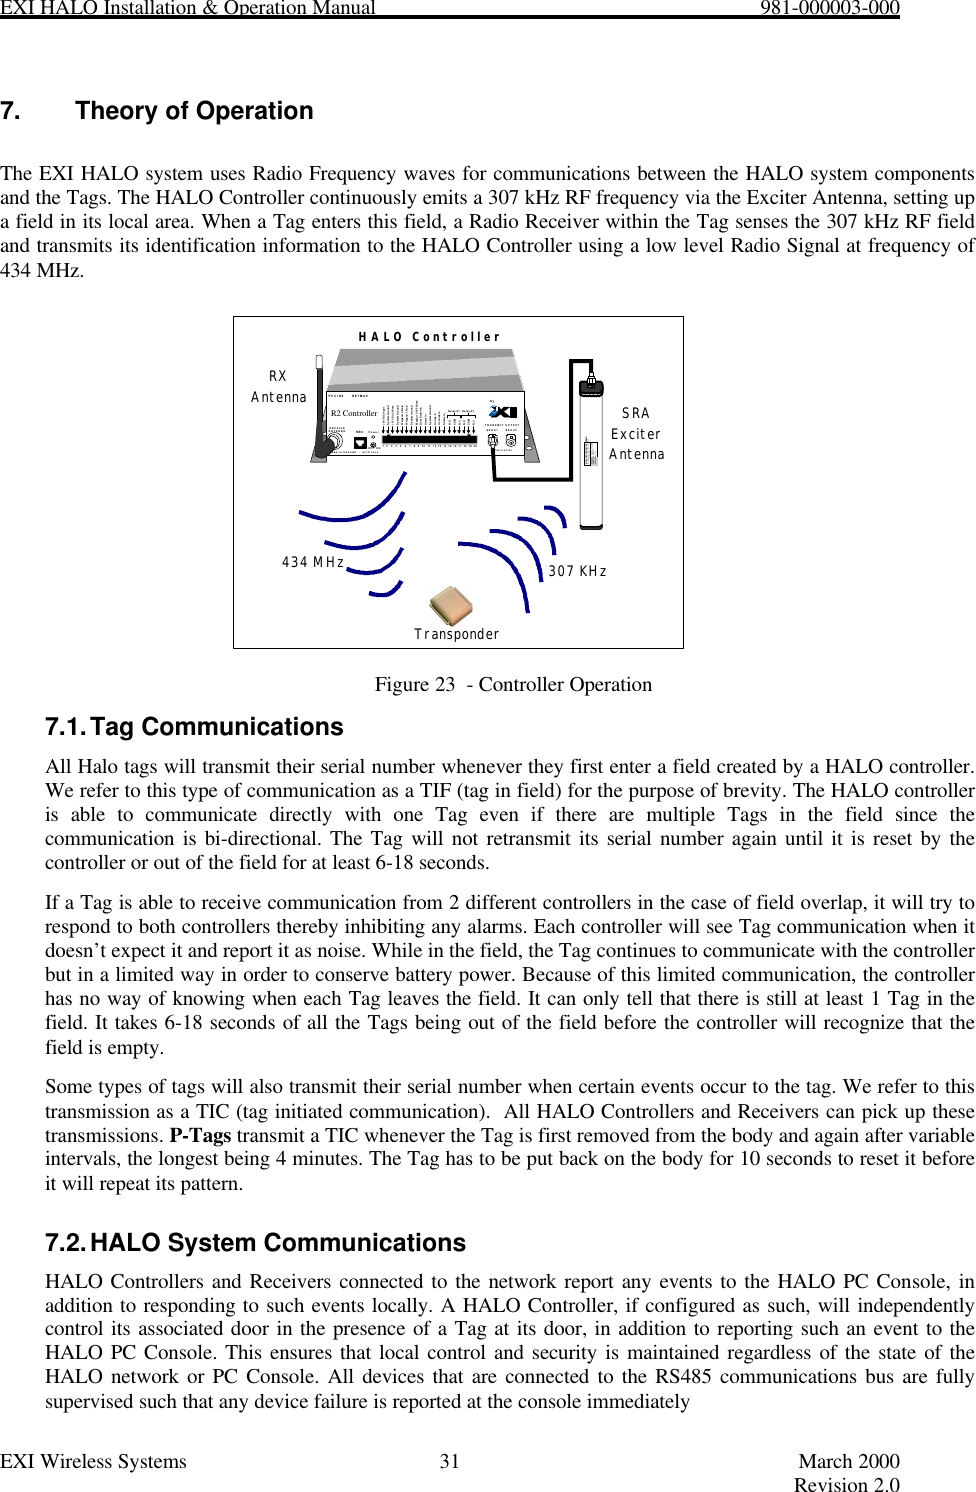 EXI HALO Installation &amp; Operation Manual                                                            981-000003-000EXI Wireless Systems 31 March 2000Revision 2.07. Theory of OperationThe EXI HALO system uses Radio Frequency waves for communications between the HALO system componentsand the Tags. The HALO Controller continuously emits a 307 kHz RF frequency via the Exciter Antenna, setting upa field in its local area. When a Tag enters this field, a Radio Receiver within the Tag senses the 307 kHz RF fieldand transmits its identification information to the HALO Controller using a low level Radio Signal at frequency of434 MHz.Figure 23  - Controller Operation7.1. Tag CommunicationsAll Halo tags will transmit their serial number whenever they first enter a field created by a HALO controller.We refer to this type of communication as a TIF (tag in field) for the purpose of brevity. The HALO controlleris able to communicate directly with one Tag even if there are multiple Tags in the field since thecommunication is bi-directional. The Tag will not retransmit its serial number again until it is reset by thecontroller or out of the field for at least 6-18 seconds.If a Tag is able to receive communication from 2 different controllers in the case of field overlap, it will try torespond to both controllers thereby inhibiting any alarms. Each controller will see Tag communication when itdoesn’t expect it and report it as noise. While in the field, the Tag continues to communicate with the controllerbut in a limited way in order to conserve battery power. Because of this limited communication, the controllerhas no way of knowing when each Tag leaves the field. It can only tell that there is still at least 1 Tag in thefield. It takes 6-18 seconds of all the Tags being out of the field before the controller will recognize that thefield is empty.Some types of tags will also transmit their serial number when certain events occur to the tag. We refer to thistransmission as a TIC (tag initiated communication).  All HALO Controllers and Receivers can pick up thesetransmissions. P-Tags transmit a TIC whenever the Tag is first removed from the body and again after variableintervals, the longest being 4 minutes. The Tag has to be put back on the body for 10 seconds to reset it beforeit will repeat its pattern.7.2. HALO System CommunicationsHALO Controllers and Receivers connected to the network report any events to the HALO PC Console, inaddition to responding to such events locally. A HALO Controller, if configured as such, will independentlycontrol its associated door in the presence of a Tag at its door, in addition to reporting such an event to theHALO PC Console. This ensures that local control and security is maintained regardless of the state of theHALO network or PC Console. All devices that are connected to the RS485 communications bus are fullysupervised such that any device failure is reported at the console immediatelyRECEIVEANTENNA RBCFCC ID#          HE7MAXTRANSMIT  OUTPUTSEA #1 SEA #2Made in Canada . .  with care ControllerbyPower1    2     3     4     5     6     7     8    9    10    11    12   13   14   15   16   17   18   19   20+24V DC InputSystem Ground+12V Ou 200 maSystem GroundWeigand  0/DataWeigand  1/GndSystem GroundMagOut  24V 200 maDoor Switch InSystem GroundUnlock InOverride InStrobe InN.OCOMN.C.N.OCOMN.CRelay #1 Relay #2Alarm InOFF  ONEXI ELECTRONIC SYSTEMSWinnipeg, Manitoba  (204) 788-1696Made in CanadaPRODUCTMODEL NO.SERIAL NO&gt;ROAM  II/TAGRRRSEA-M1118HALO ControllerRXAntenna SRAExciterAntenna434 MHz 307 KHzTransponderR2 Controller